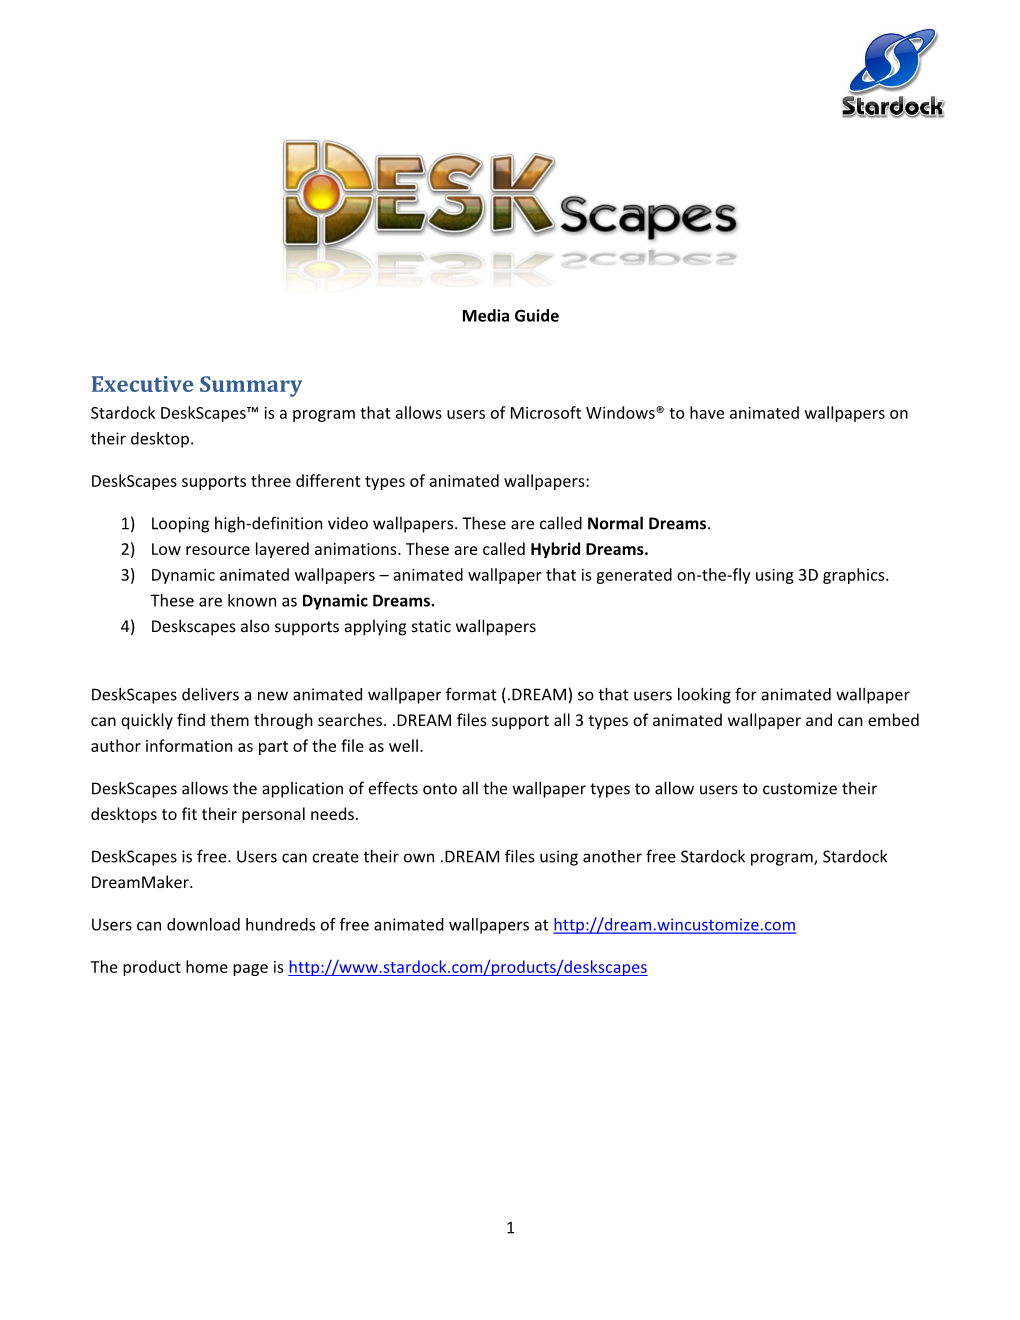 Executive Summary Stardock Deskscapes™ Is a Program That Allows Users of Microsoft Windows® to Have Animated Wallpapers on Their Desktop